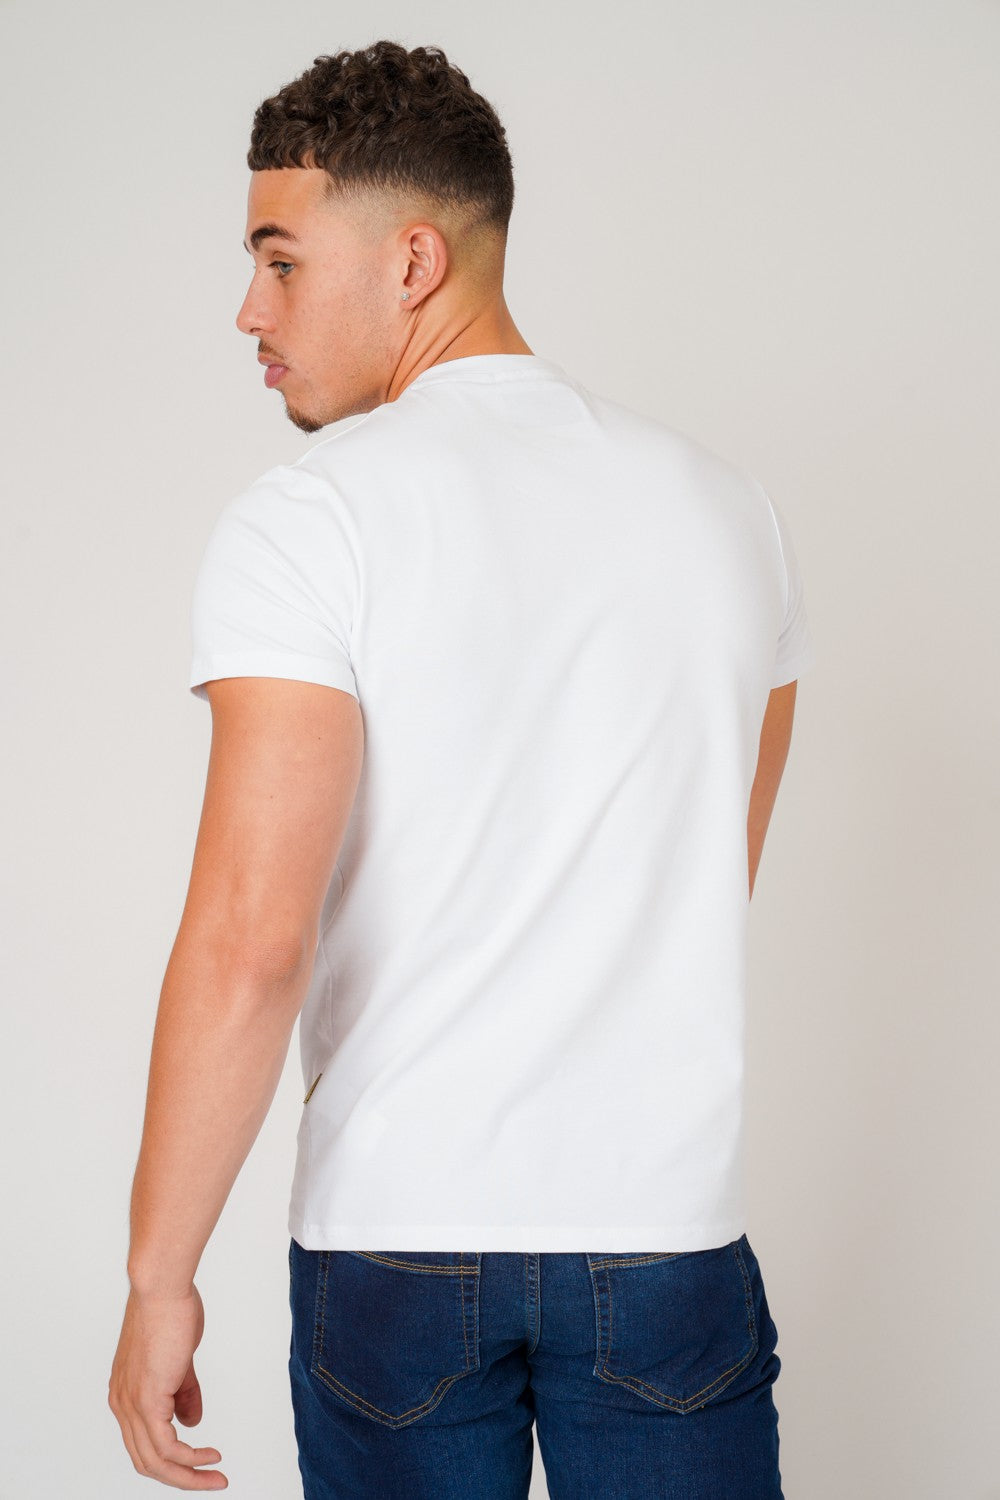 DON SEQUIN WHITE T-SHIRT - Don Jeans